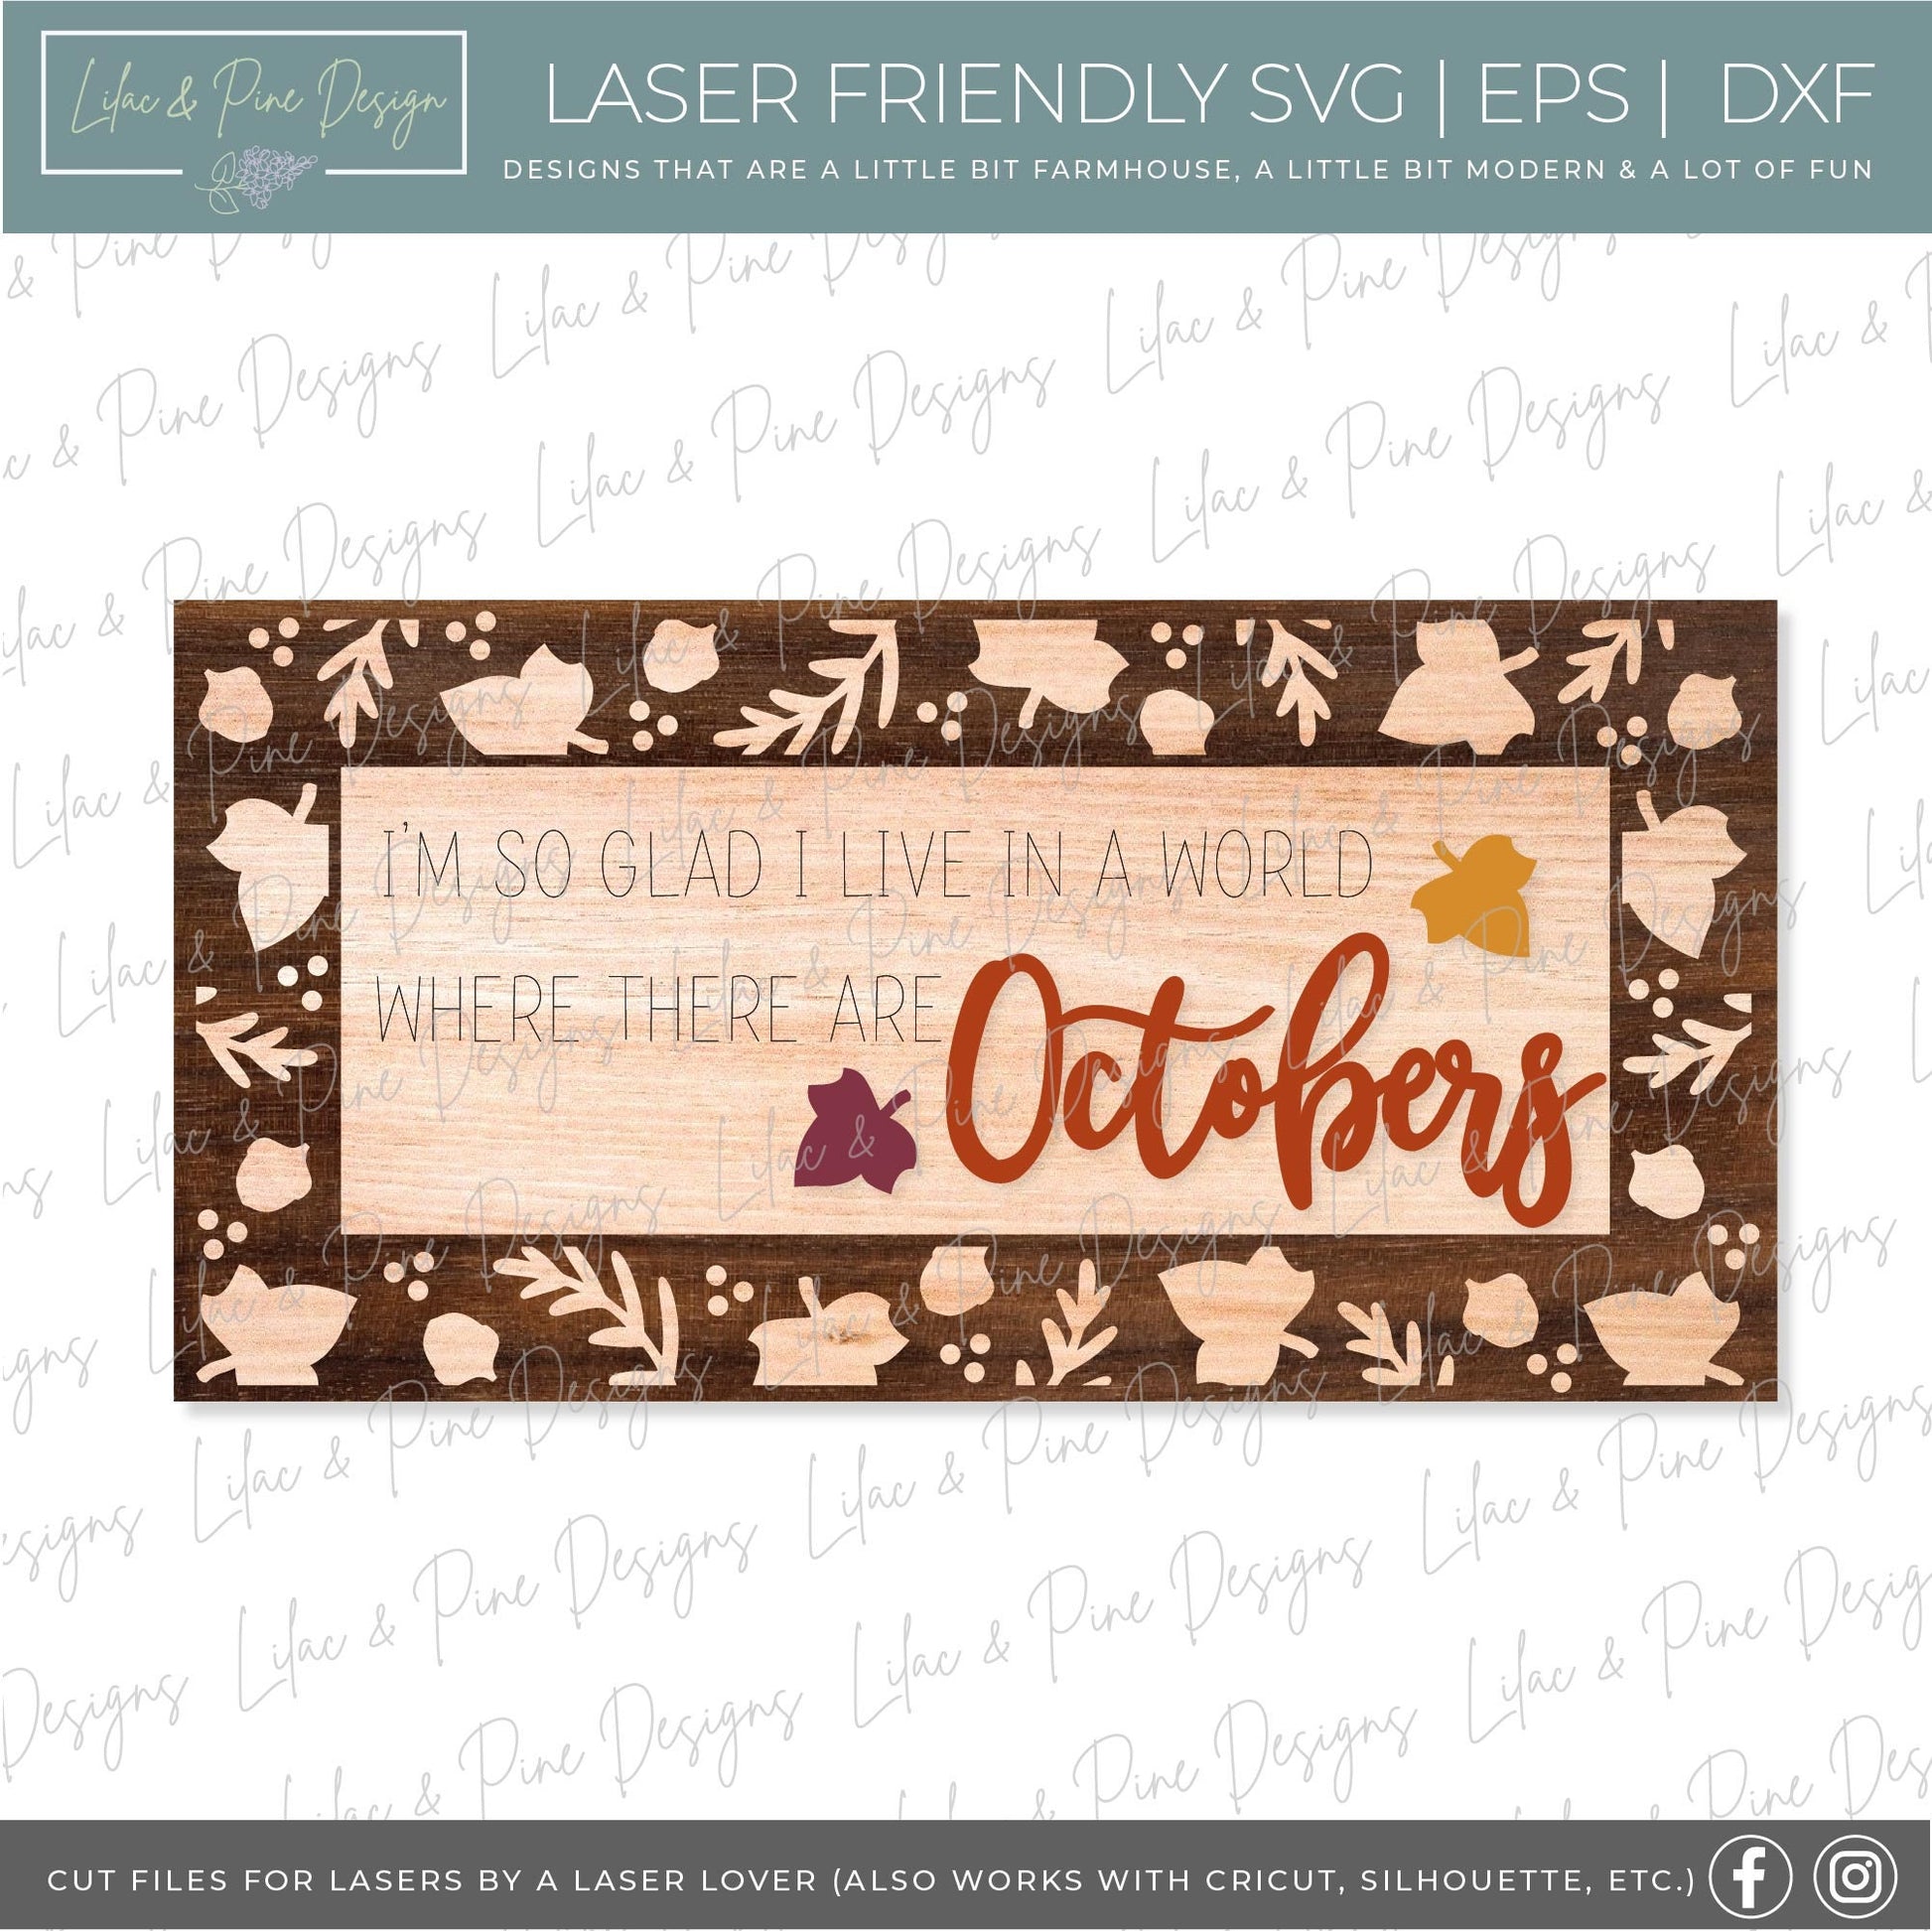 In a World Where there are Octobers. Autumn sign svg, fall sign SVG, fall laser svg, fall home decor SVG, Glowforge SVG, laser cut file